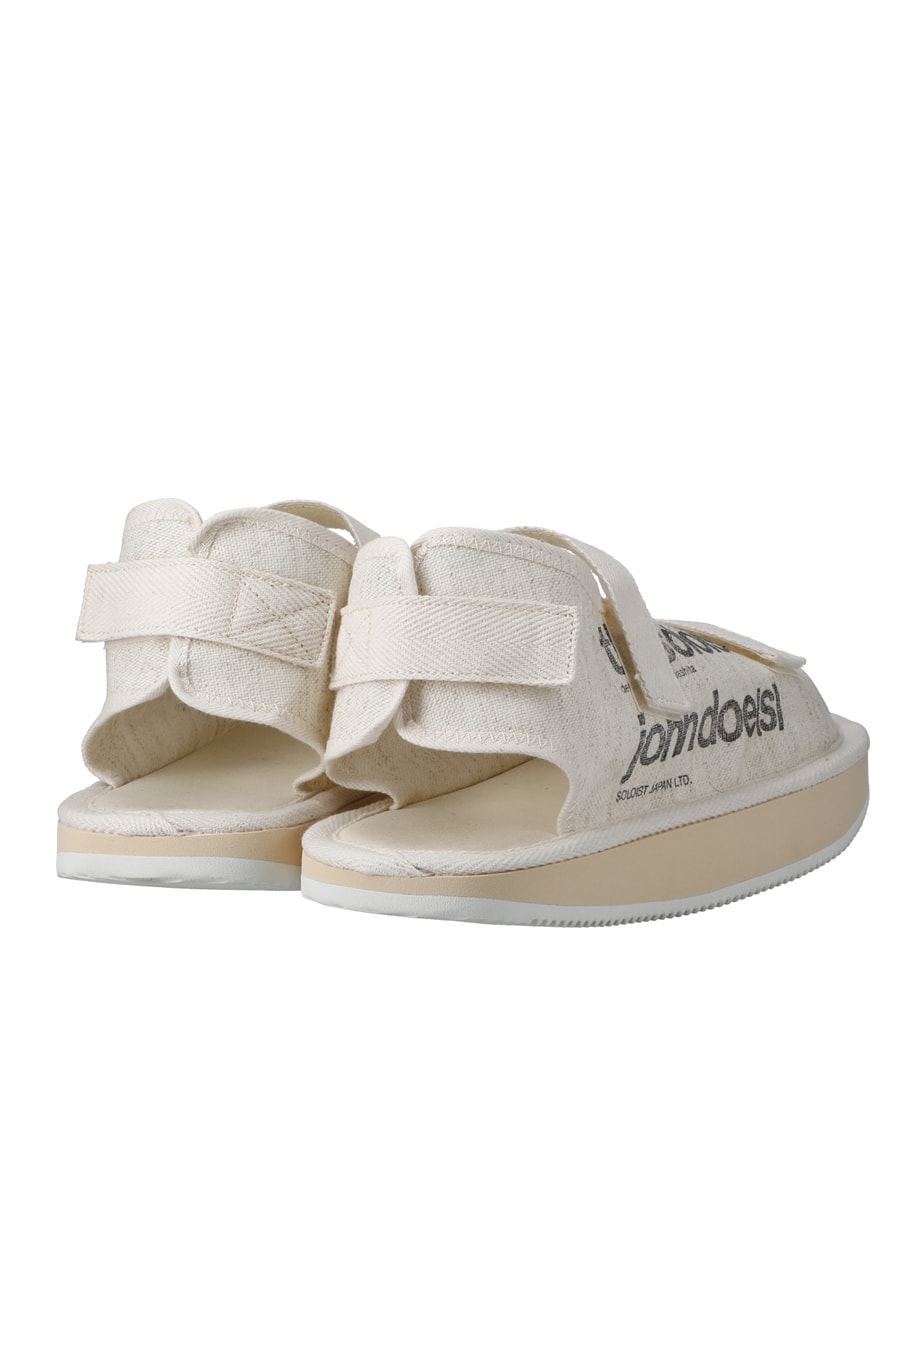 TAKAHIROMIYASHITA TheSoloist. x Suicoke SS21 Sandals collaboration spring summer 2021 does release date info buy colorway medical slipper military Mario Marenco